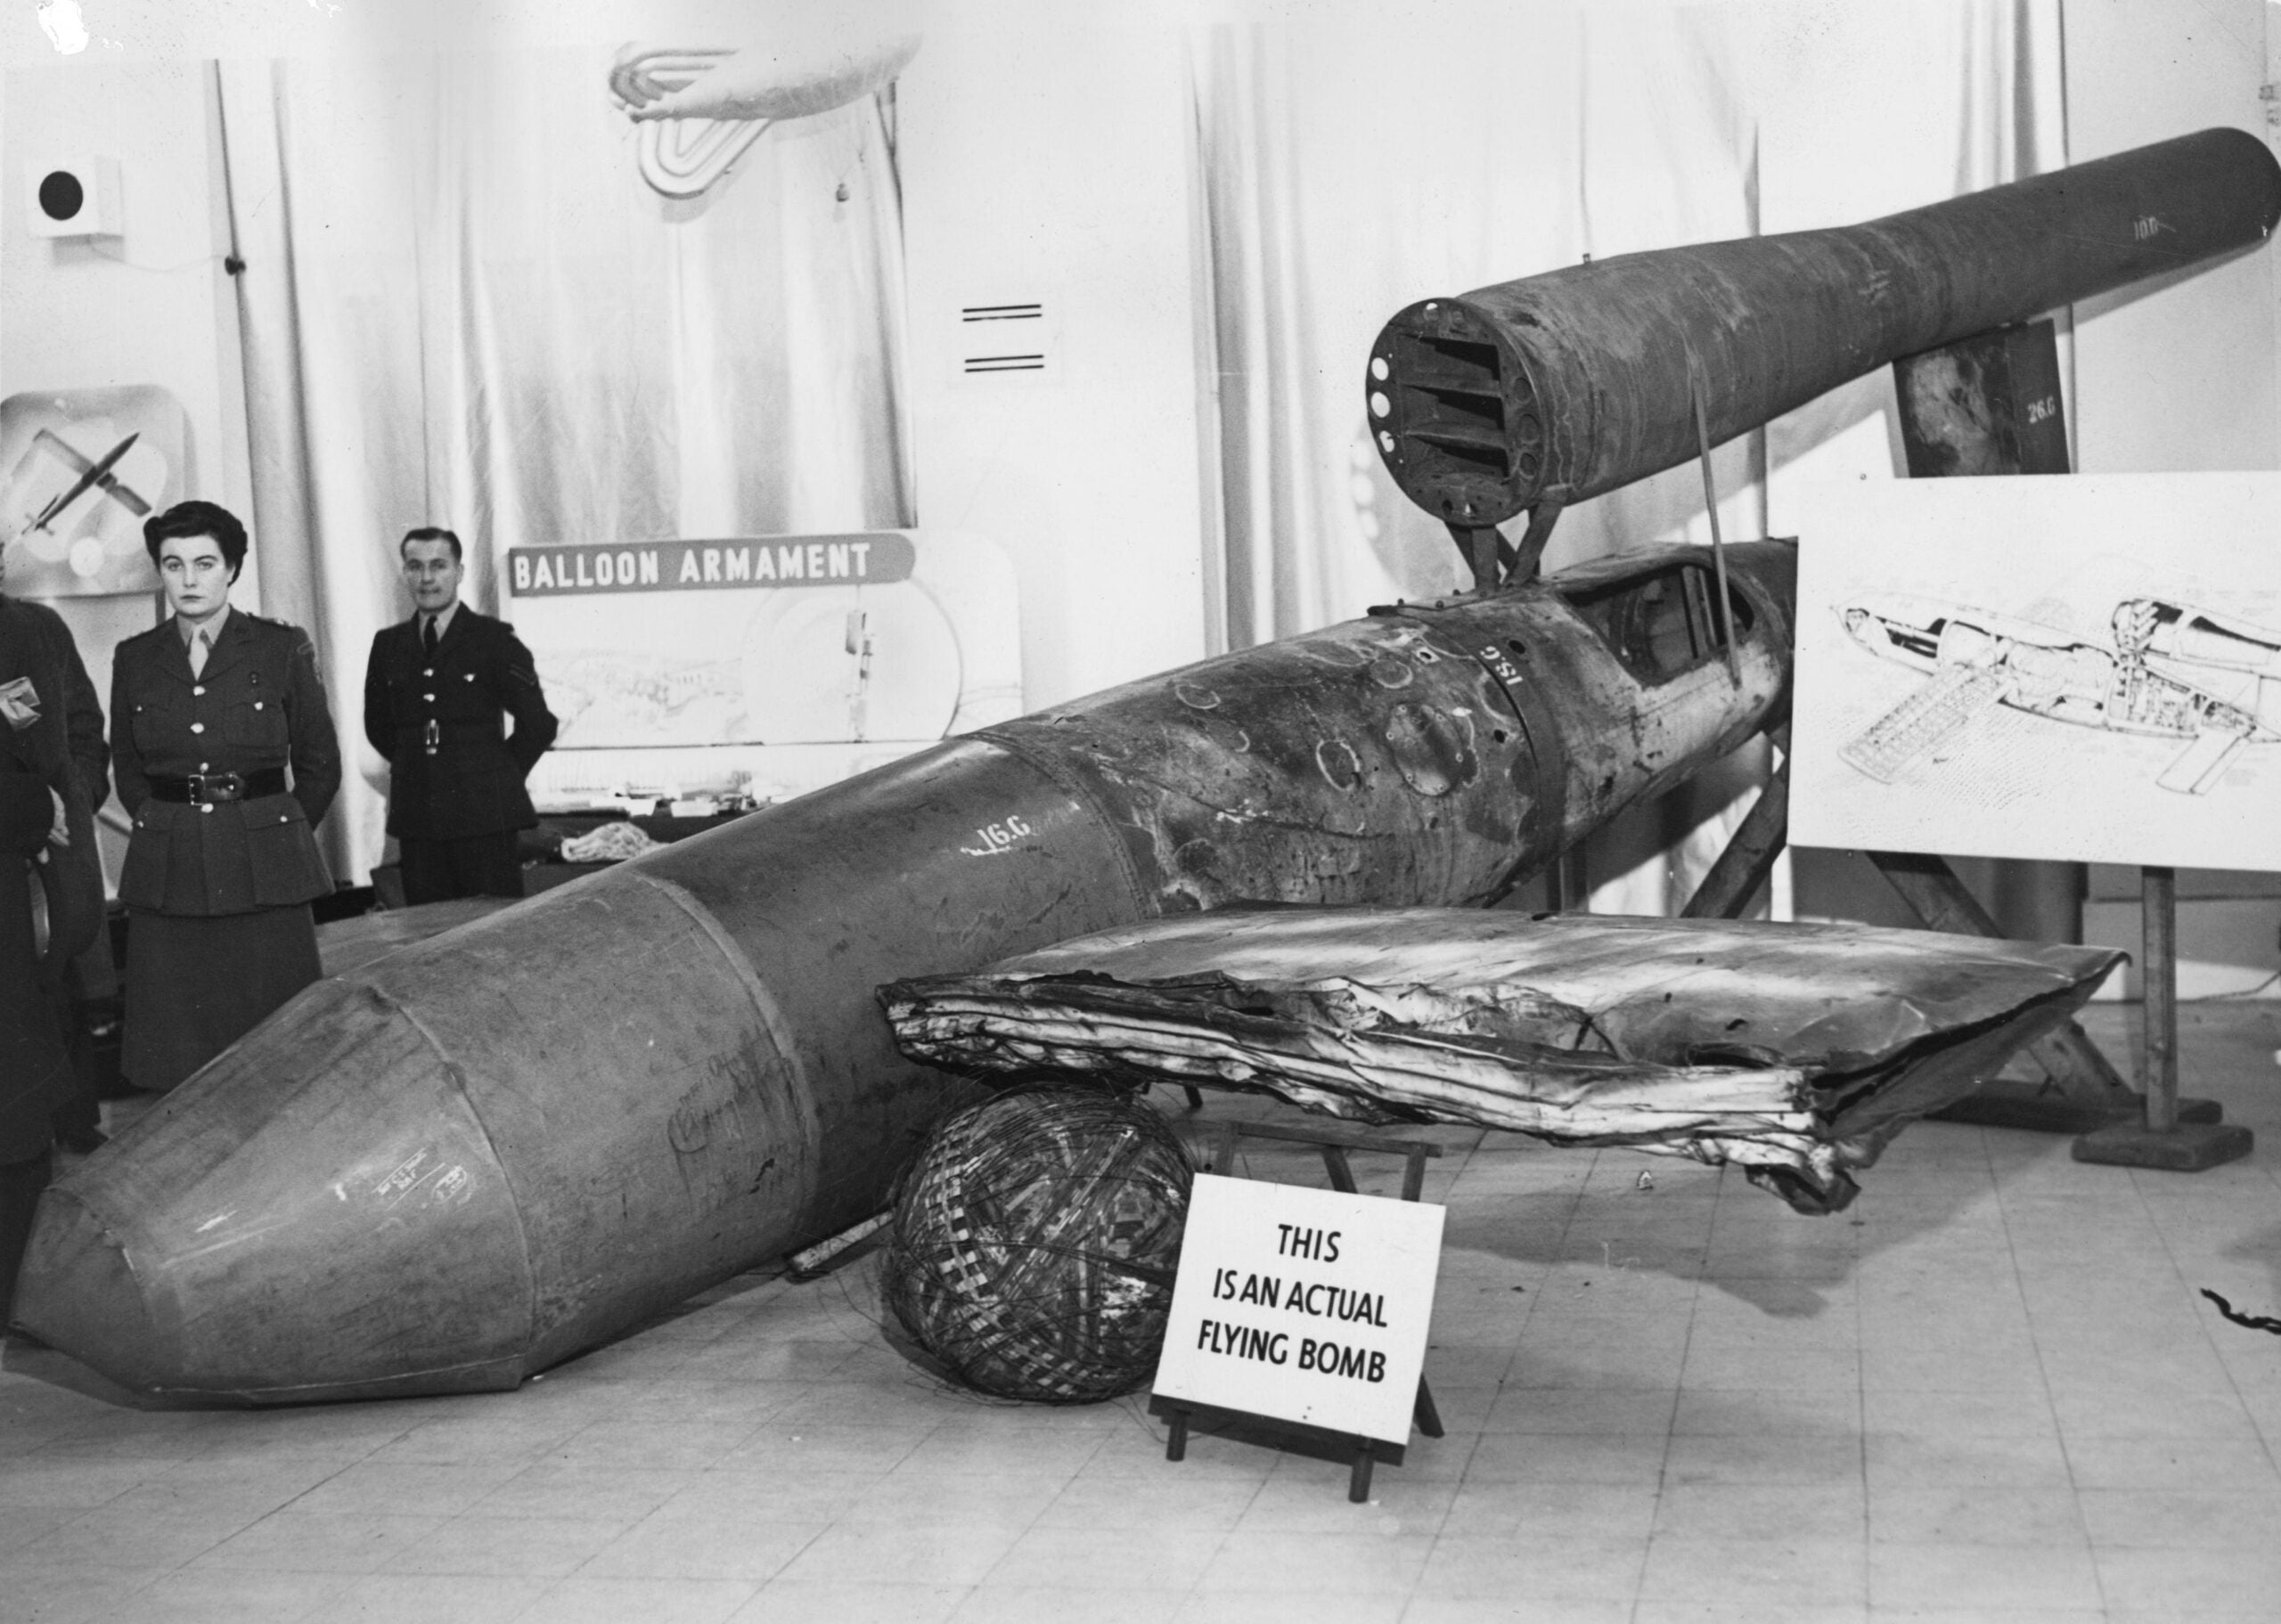 1st November 1944:  A V1 flying bomb, or Doodlebug, on show at Roote's, Piccadilly, London. A sign next to the bomb reads 'This is an actual flying bomb'.  (Photo by A. R. Coster/Topical Press Agency/Getty Images)